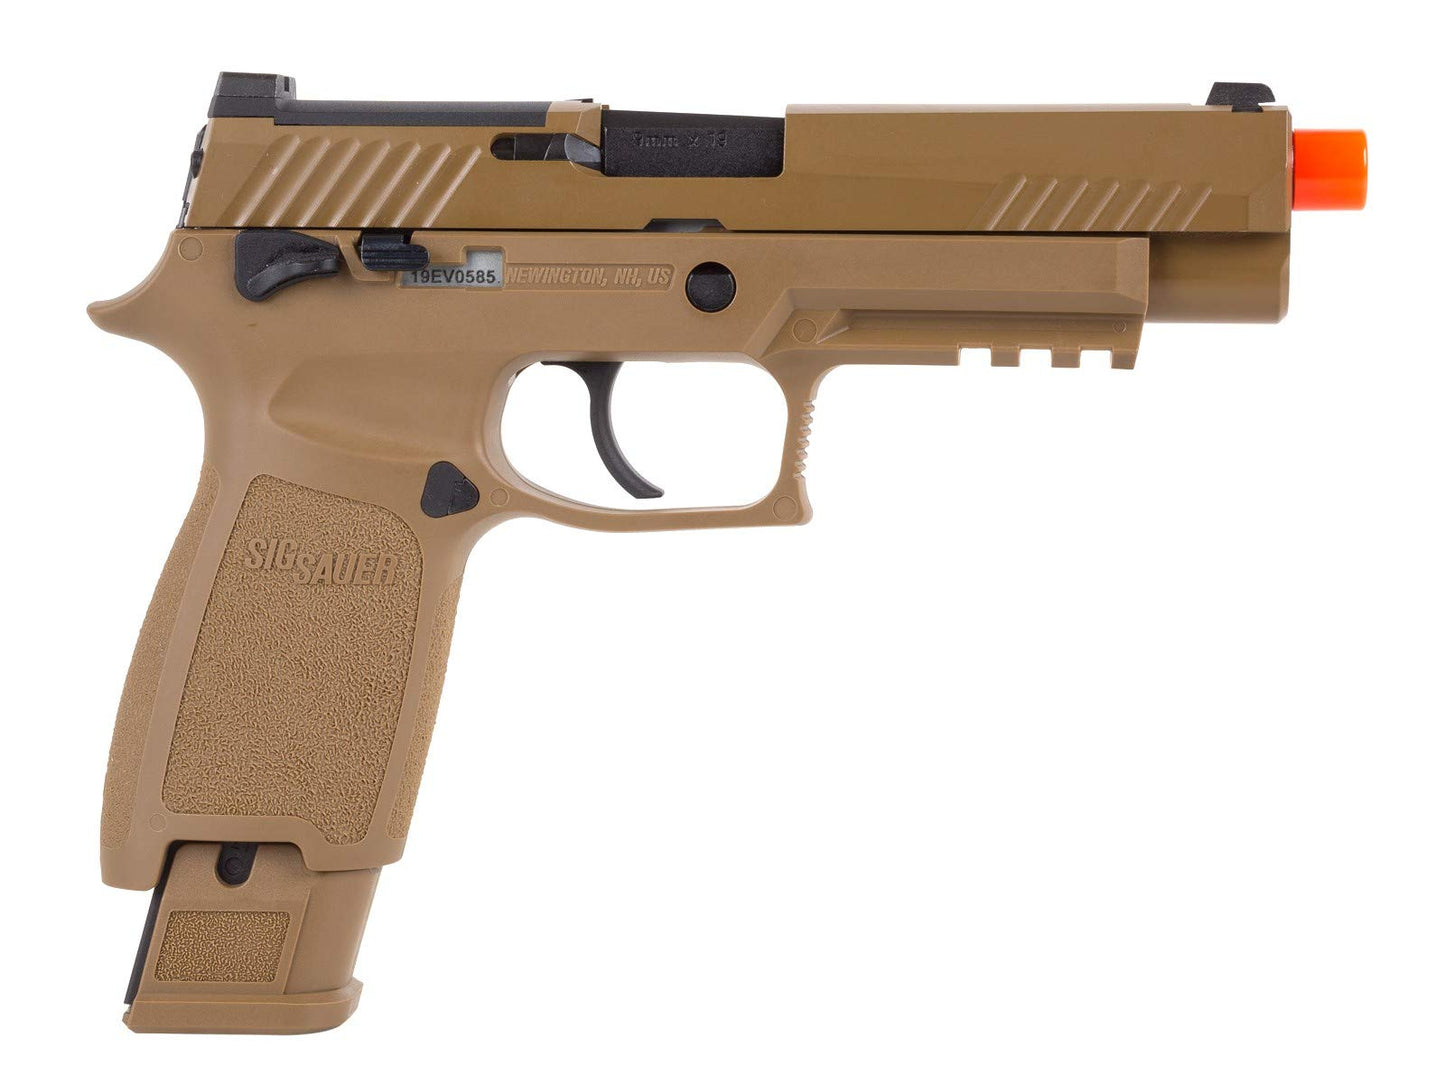 Airsoft Proforce M17, 6mm, 5.5", 21rd, CO2 Power Source, Coyote Tan